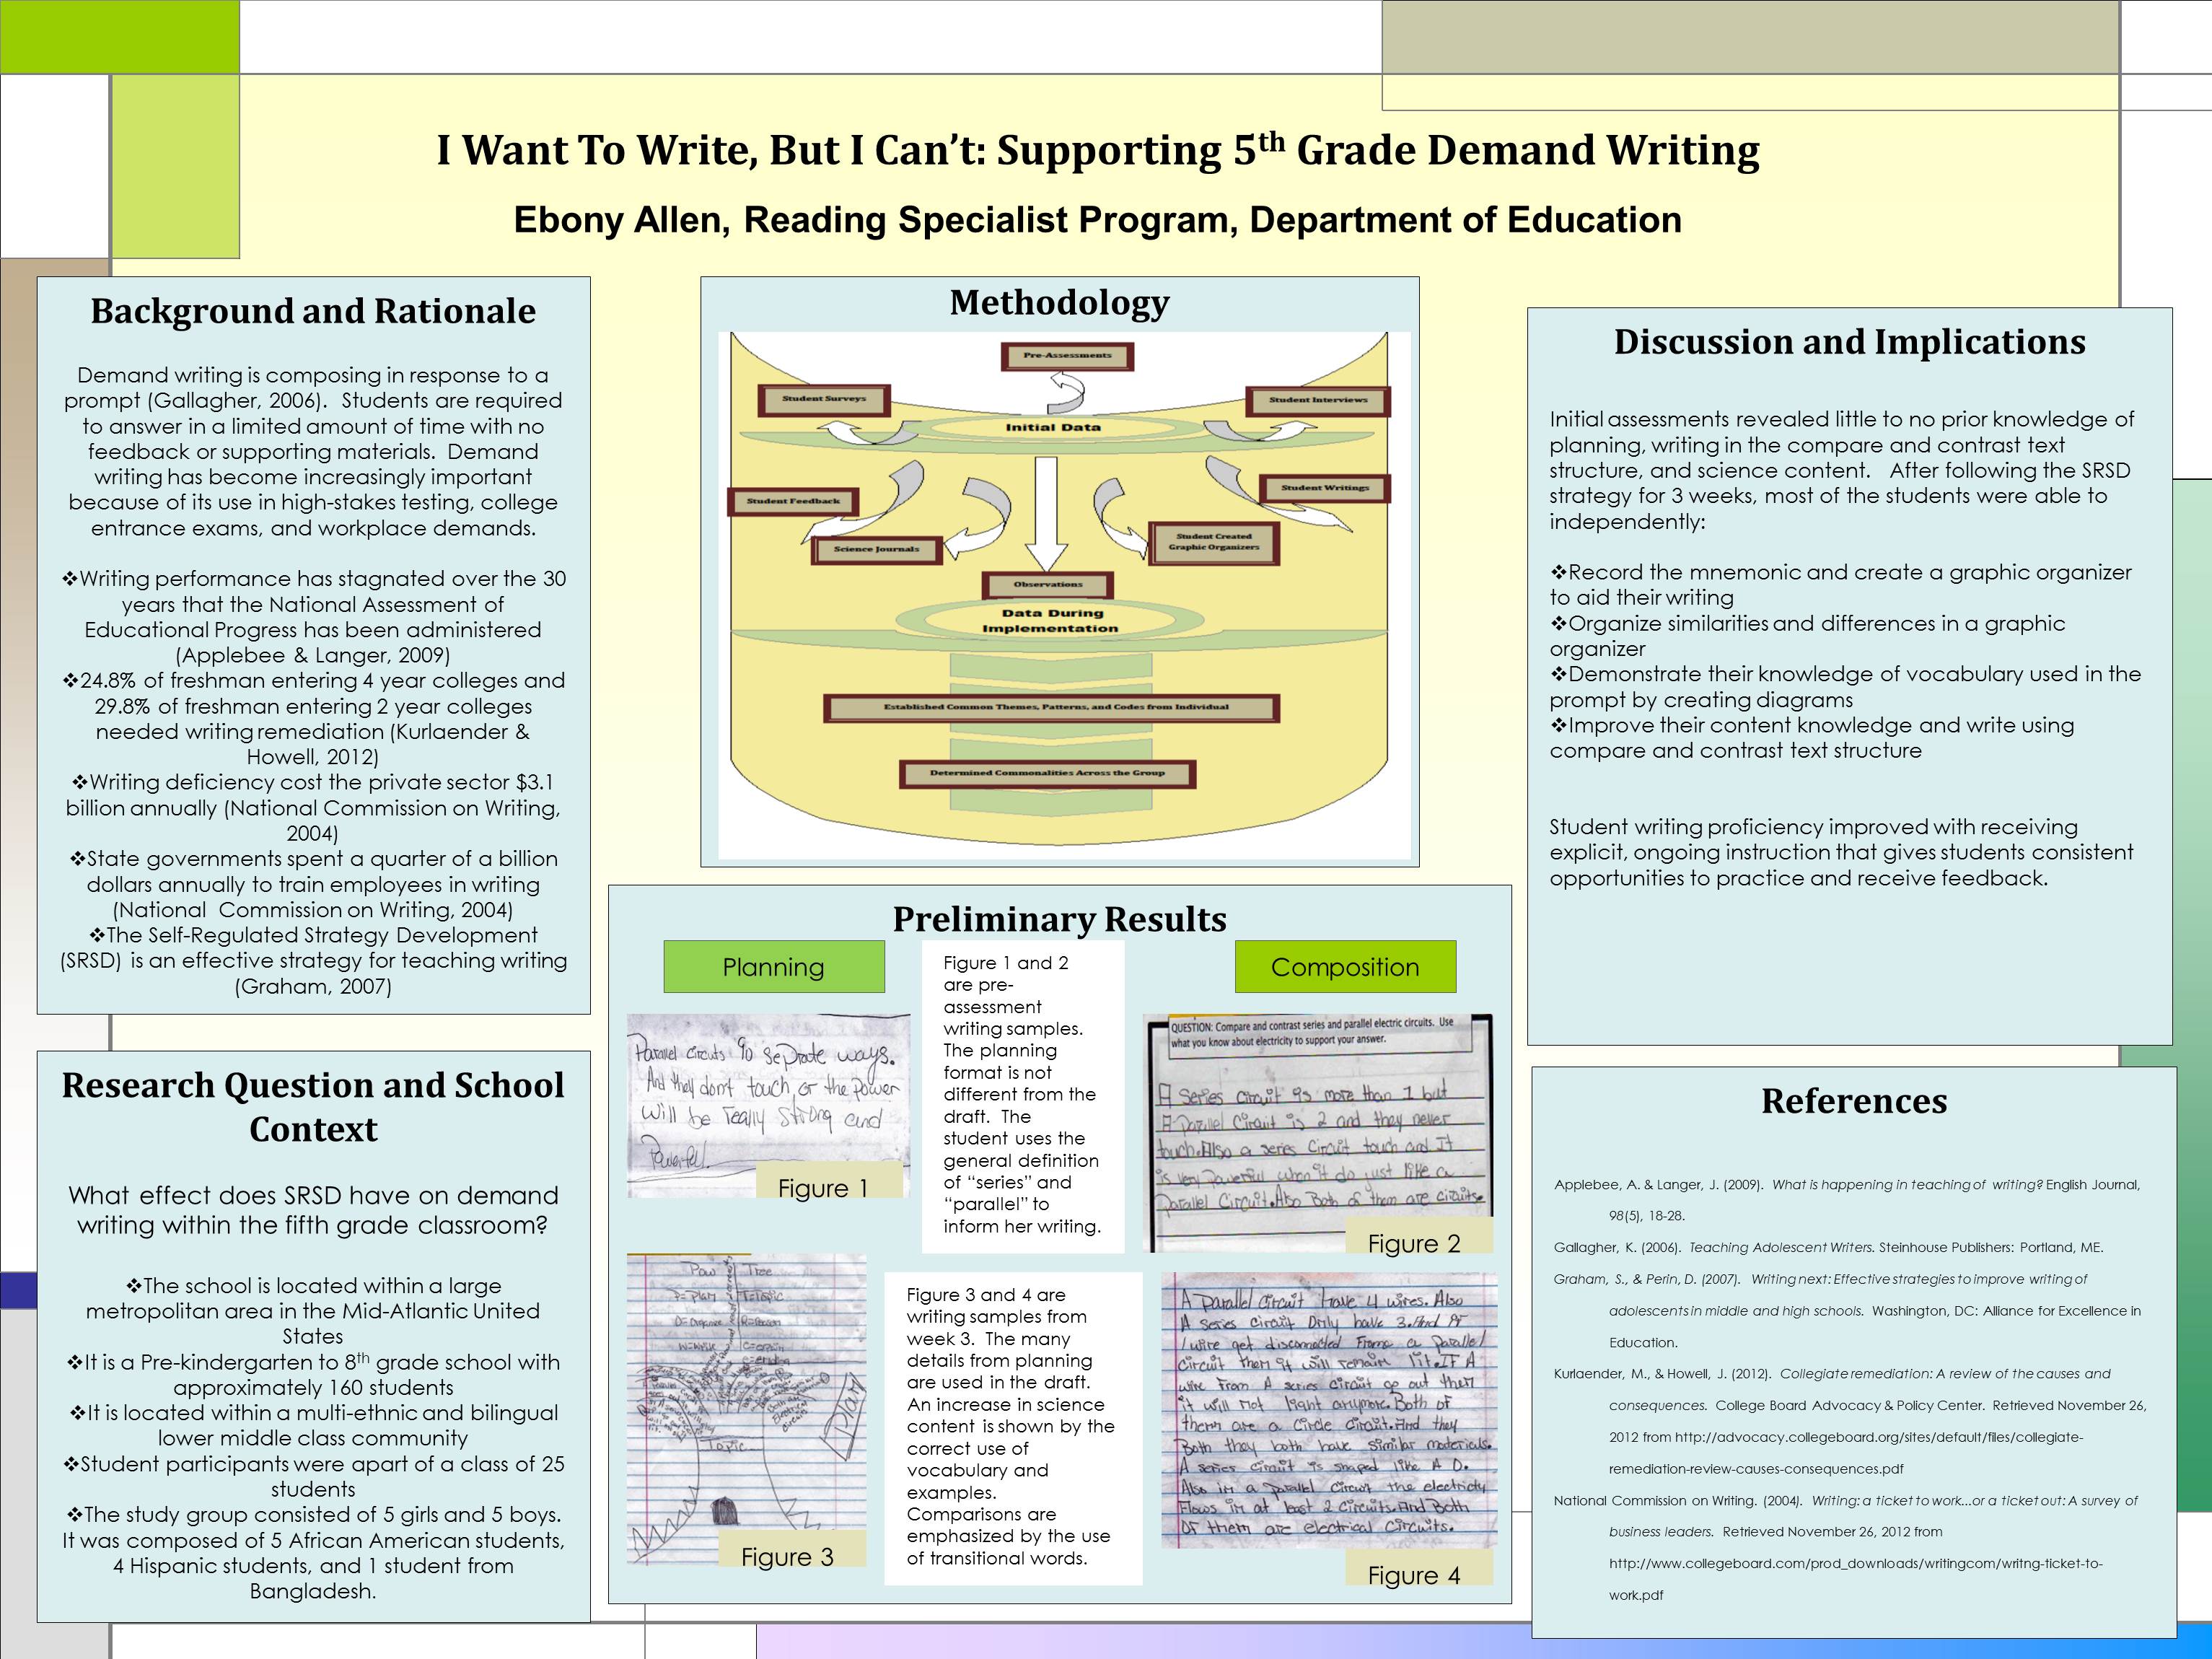 Enlarged poster image: 'I want to write, but I can't': Strategies for supporting 5th grade demand writing in science